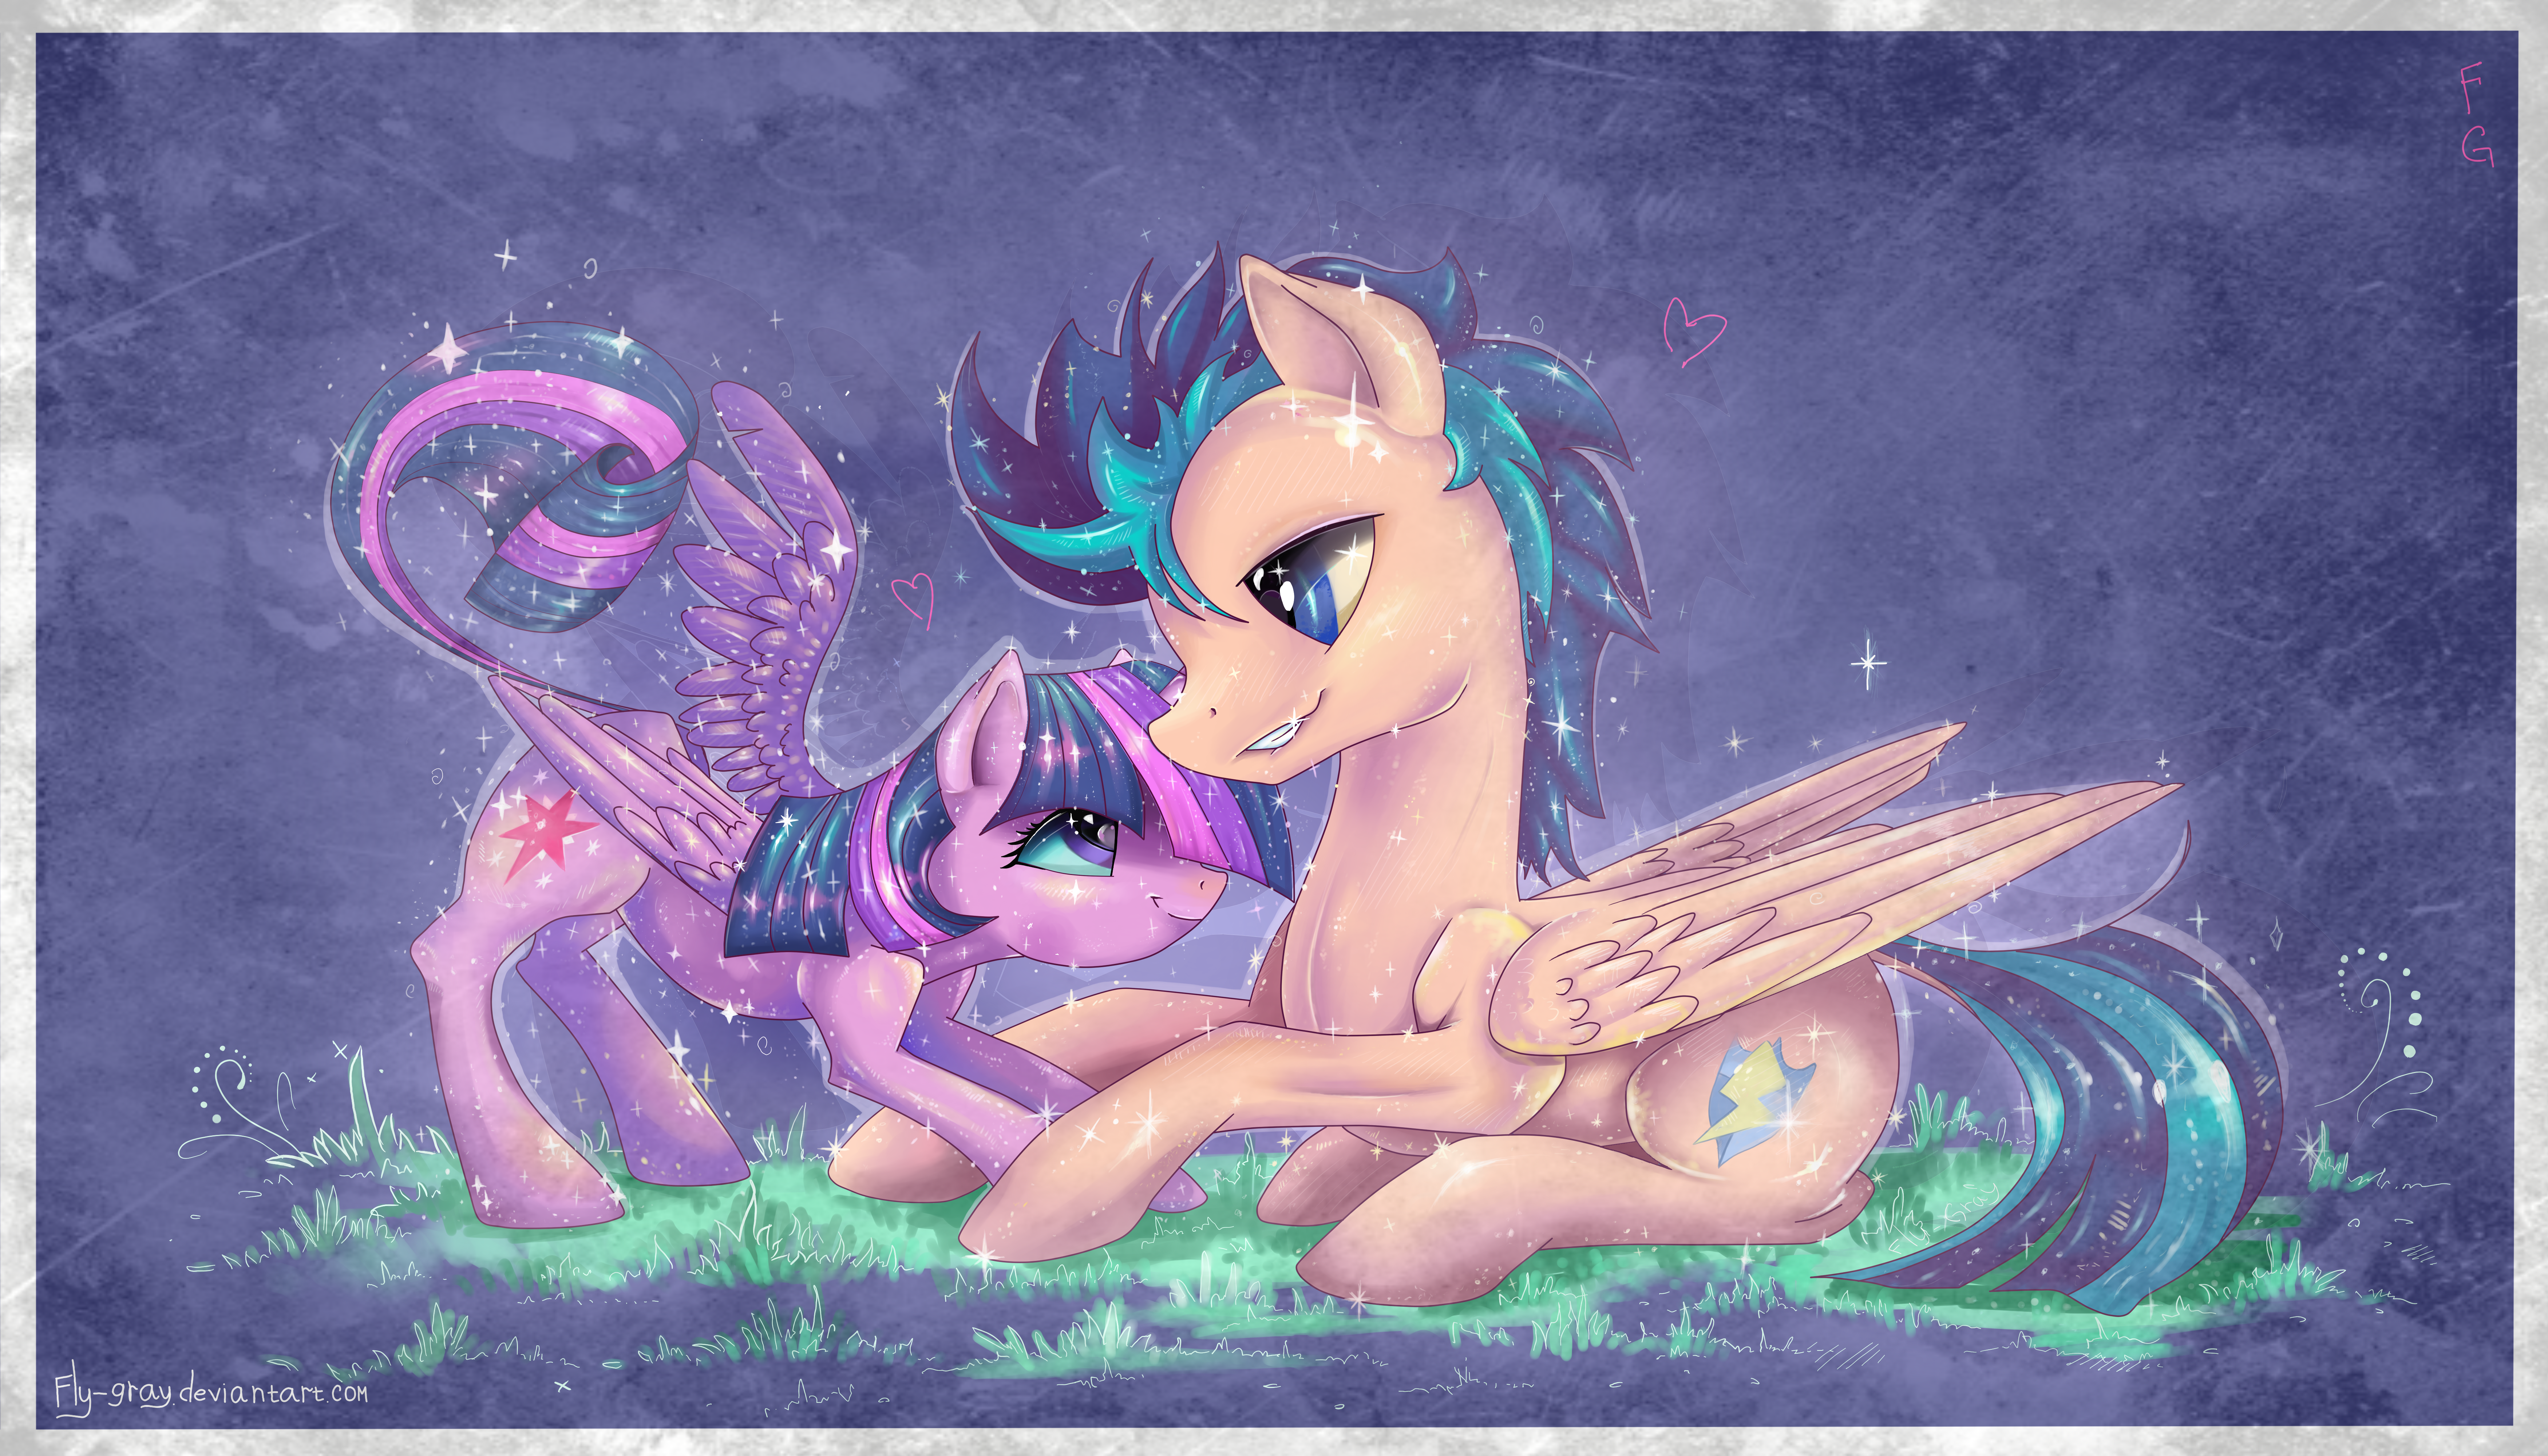 Twilight Sparkle and Flash Sentry by Fly-Gray